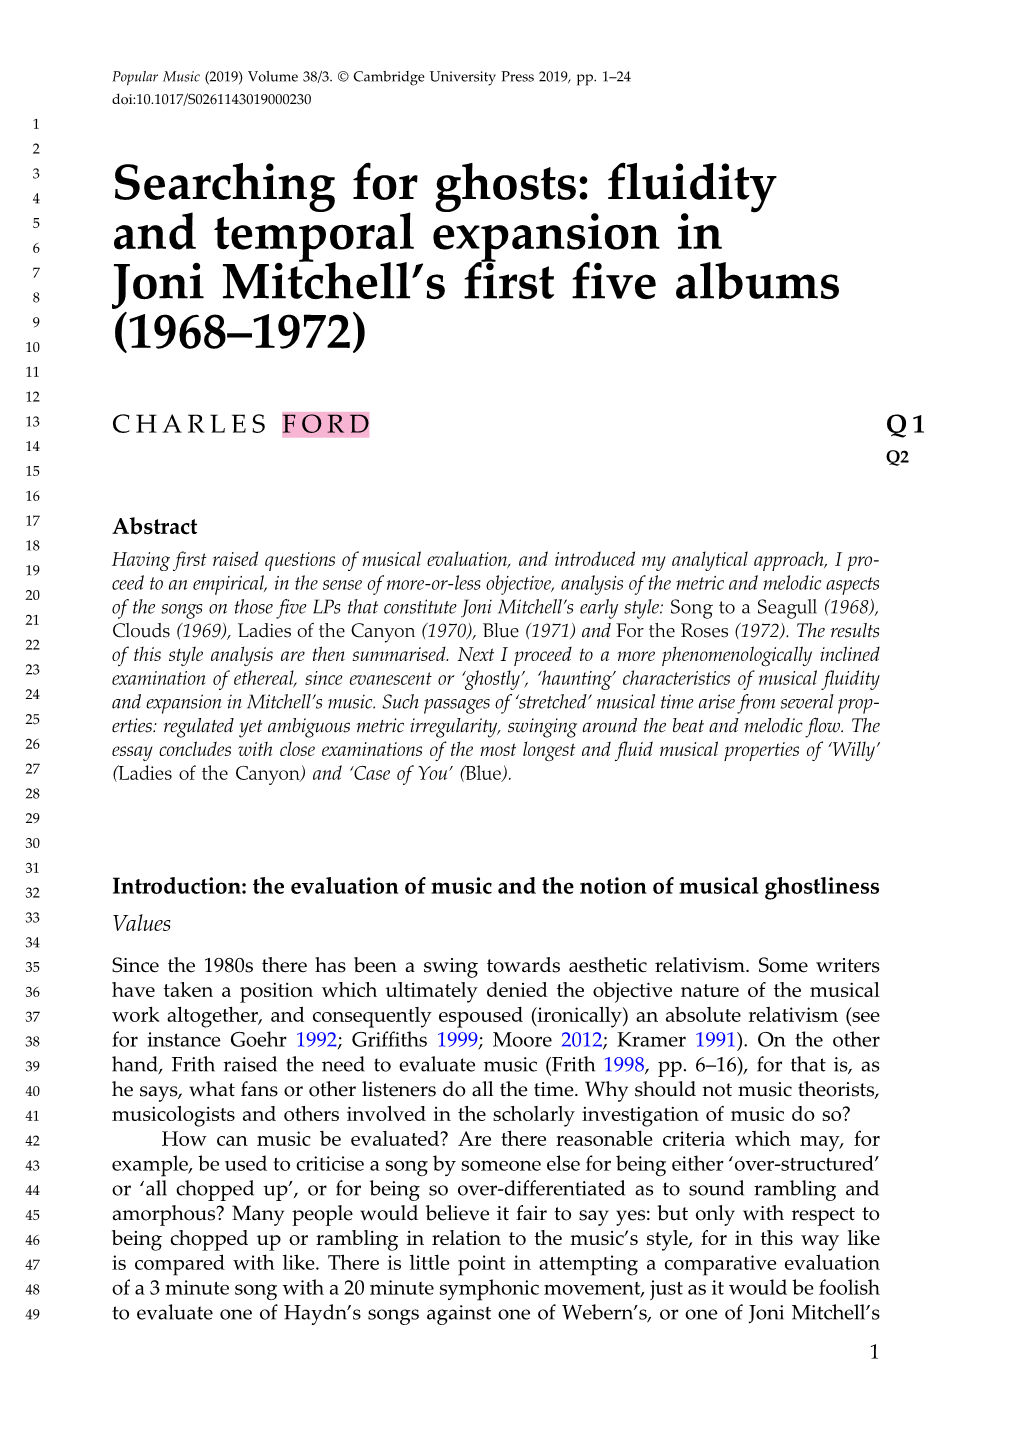 Searching for Ghosts: Fluidity and Temporal Expansion